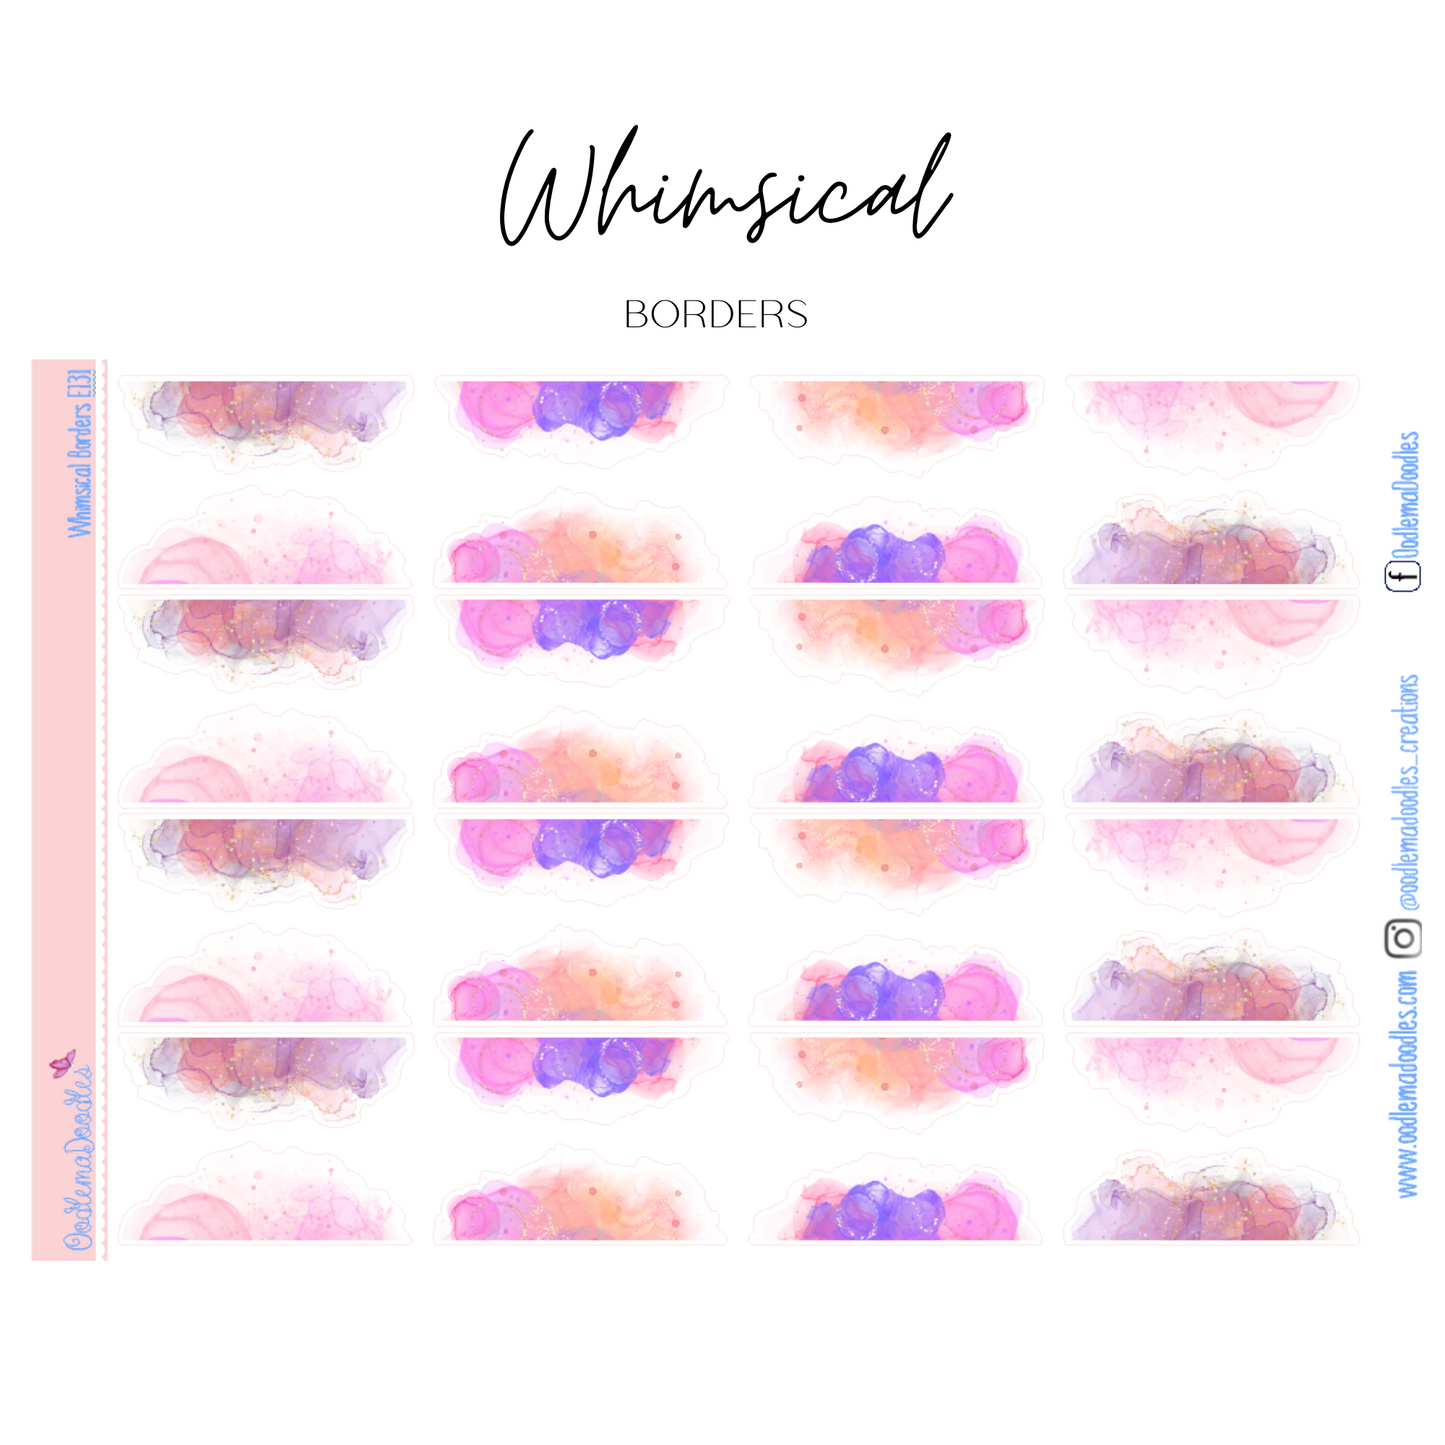 Whimsical Watercolour Swatches